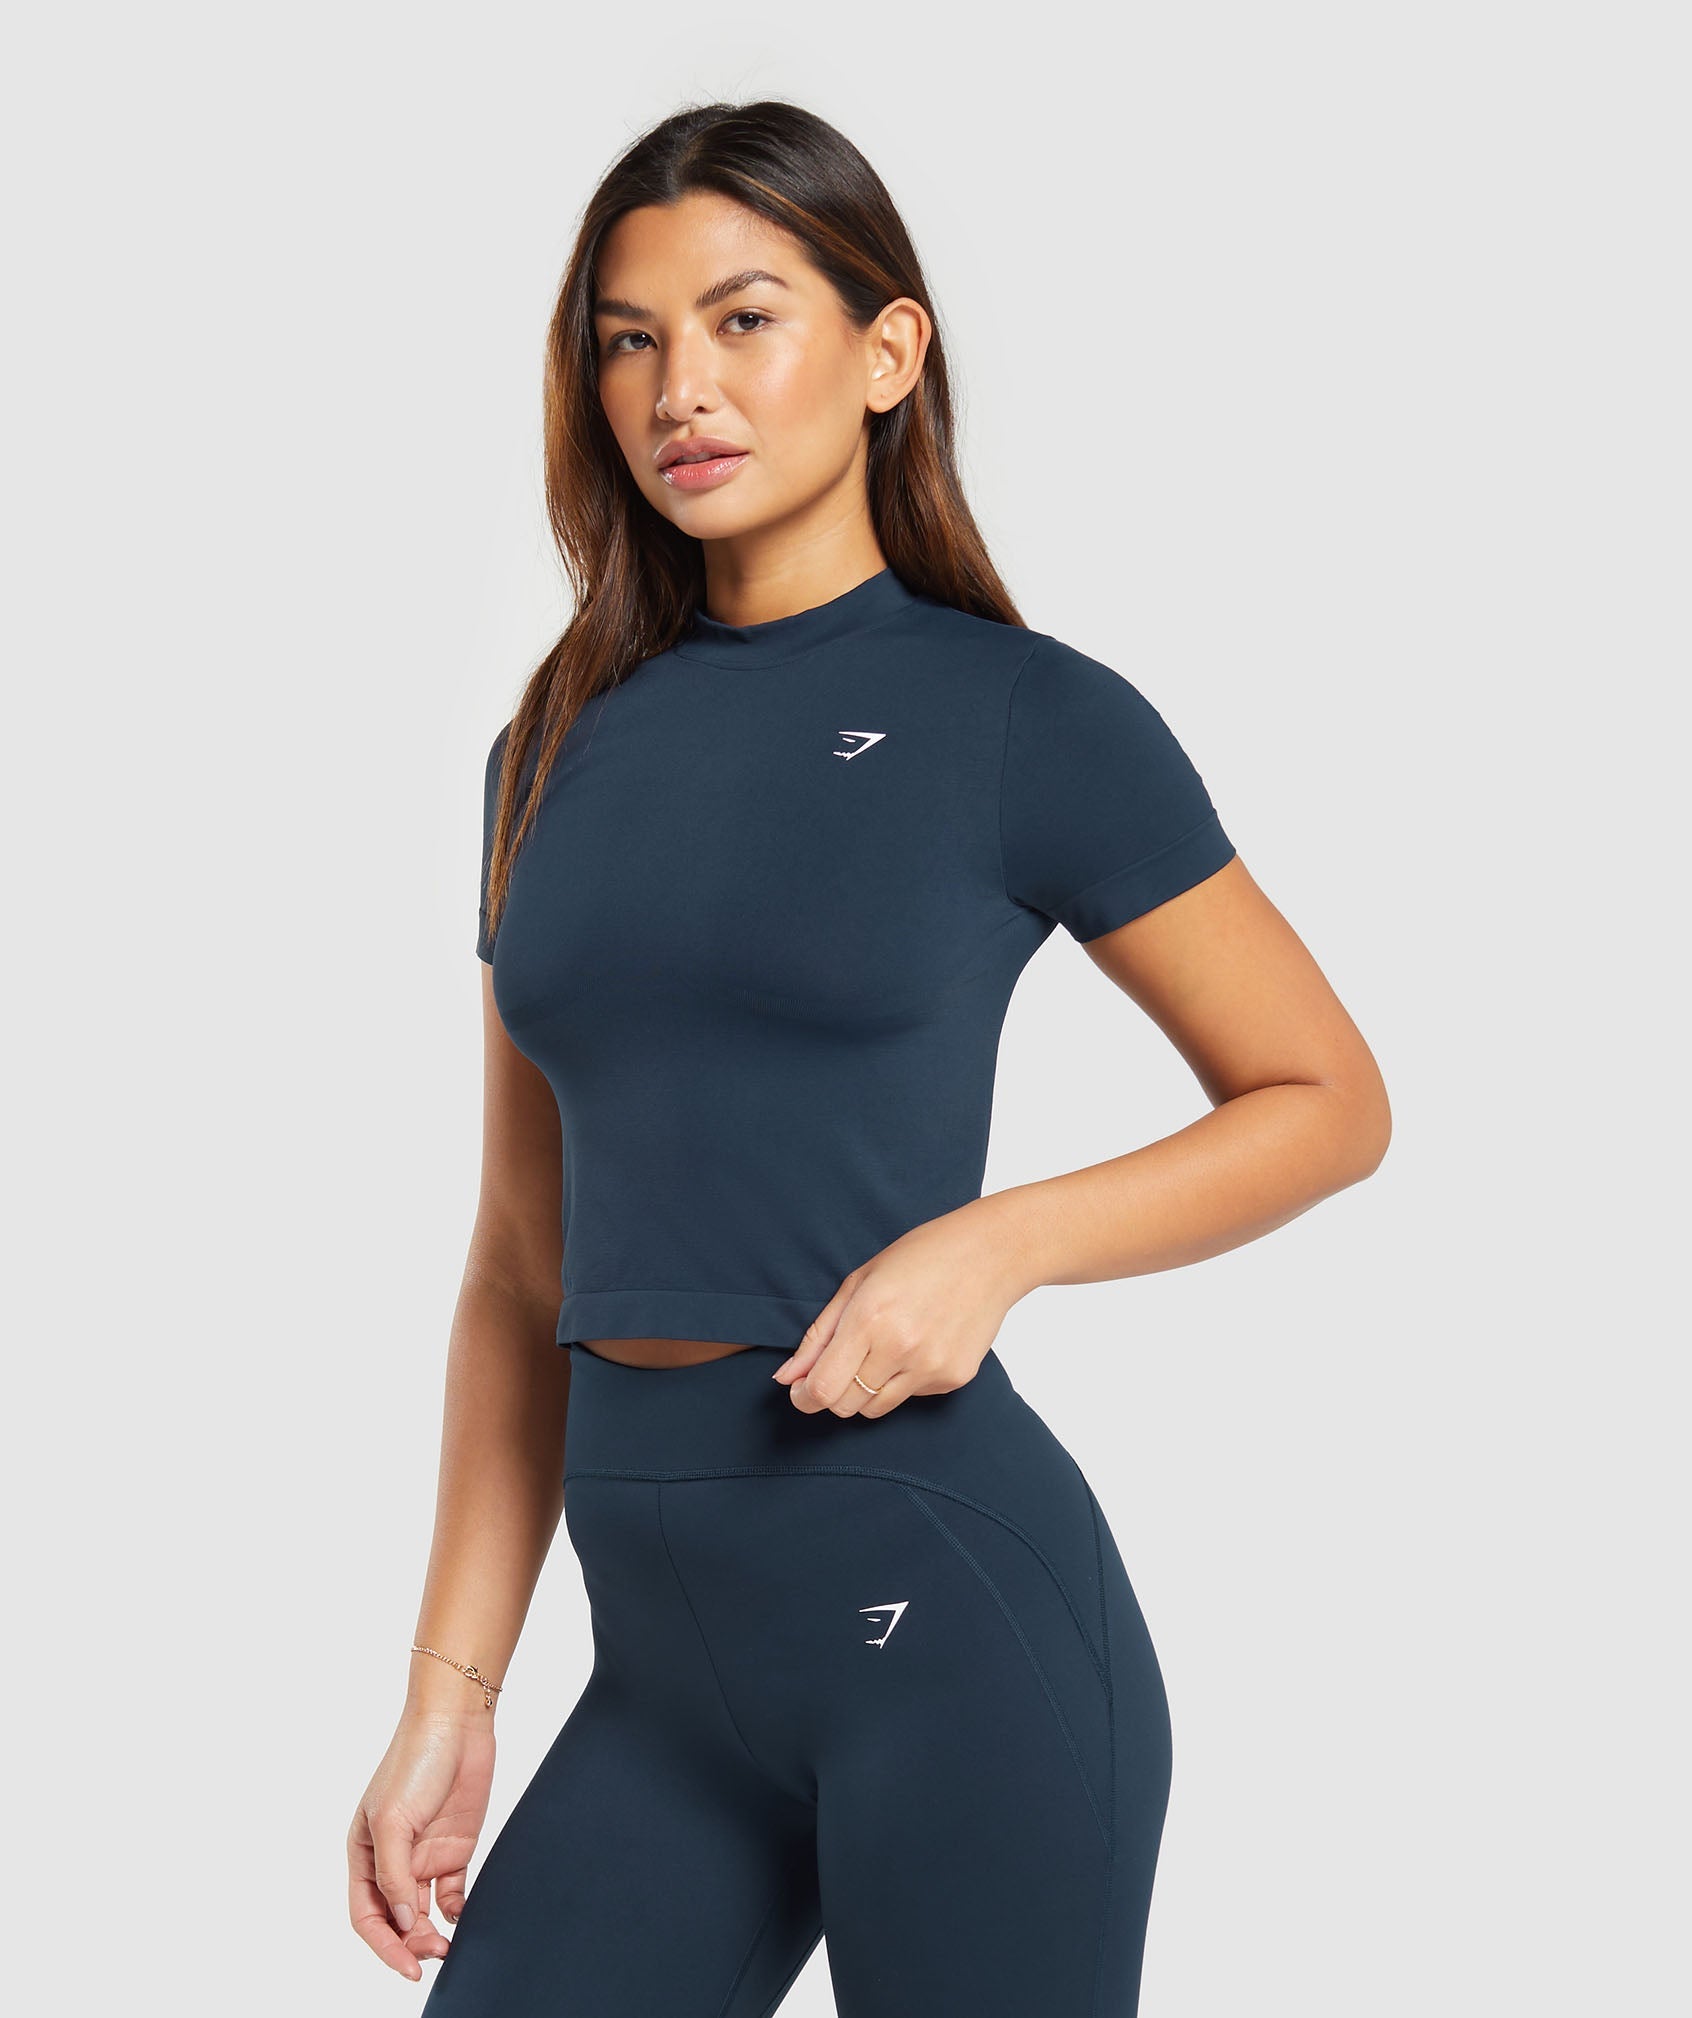 Everyday Seamless Tight Fit Tee in Navy - view 3